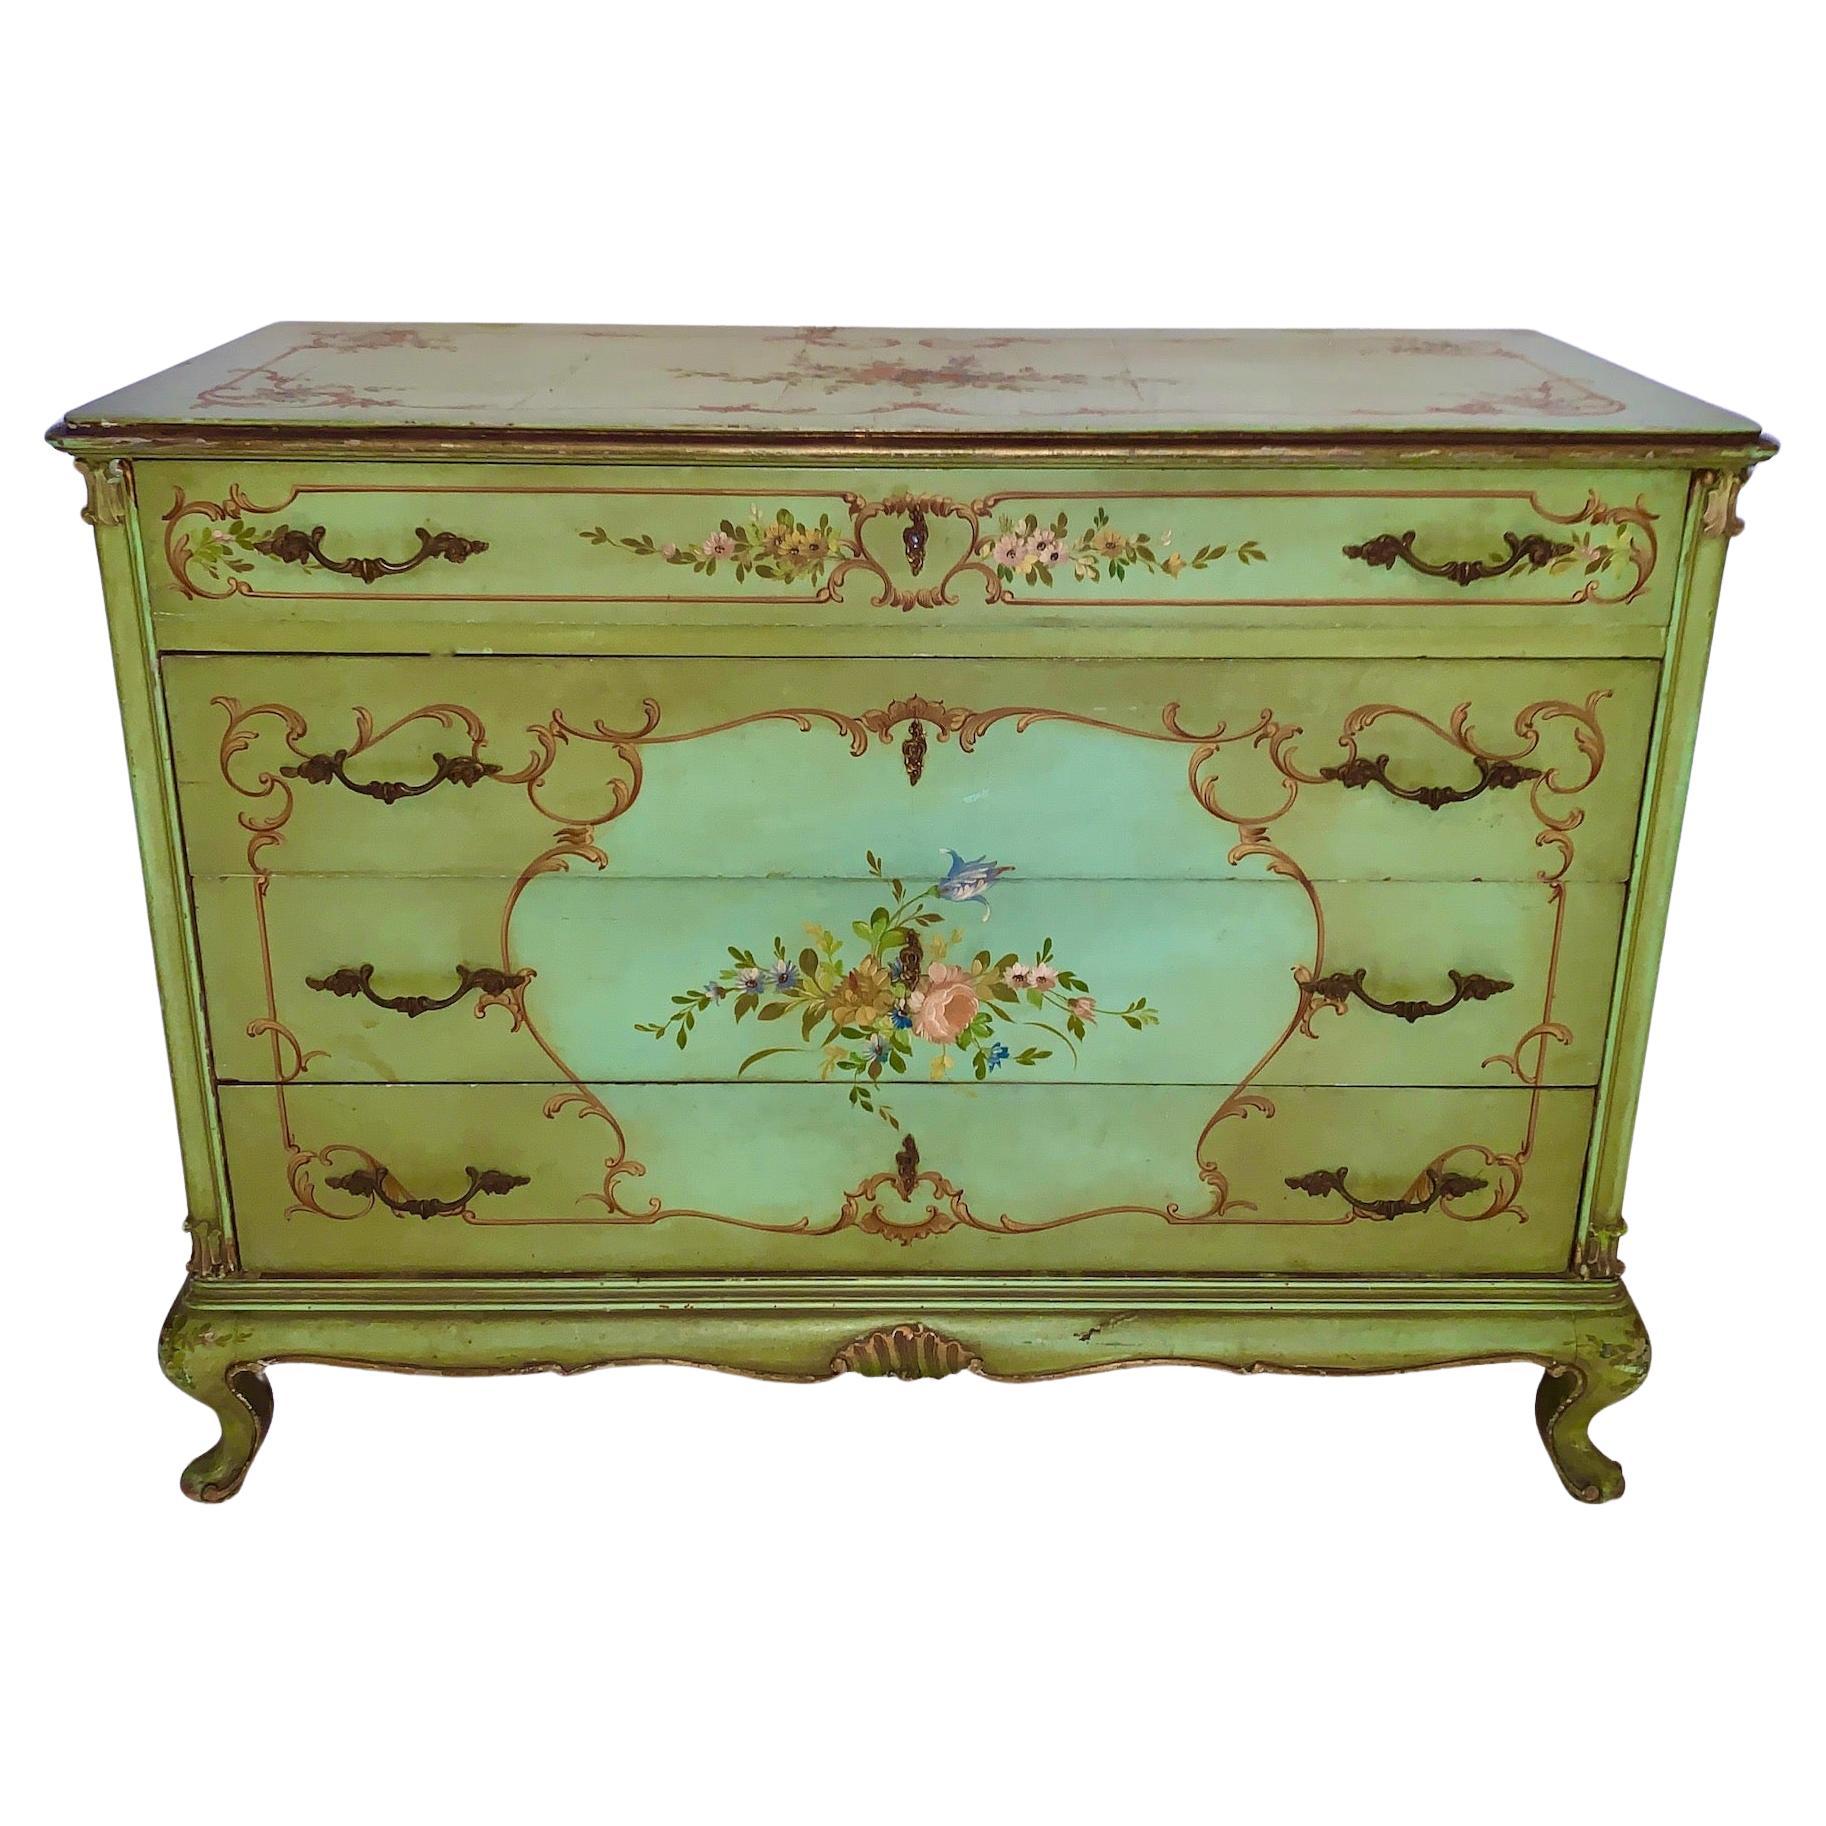 Early 20th C. Venetian style Hand Painted and Decorated Partial Gilt Dresser For Sale